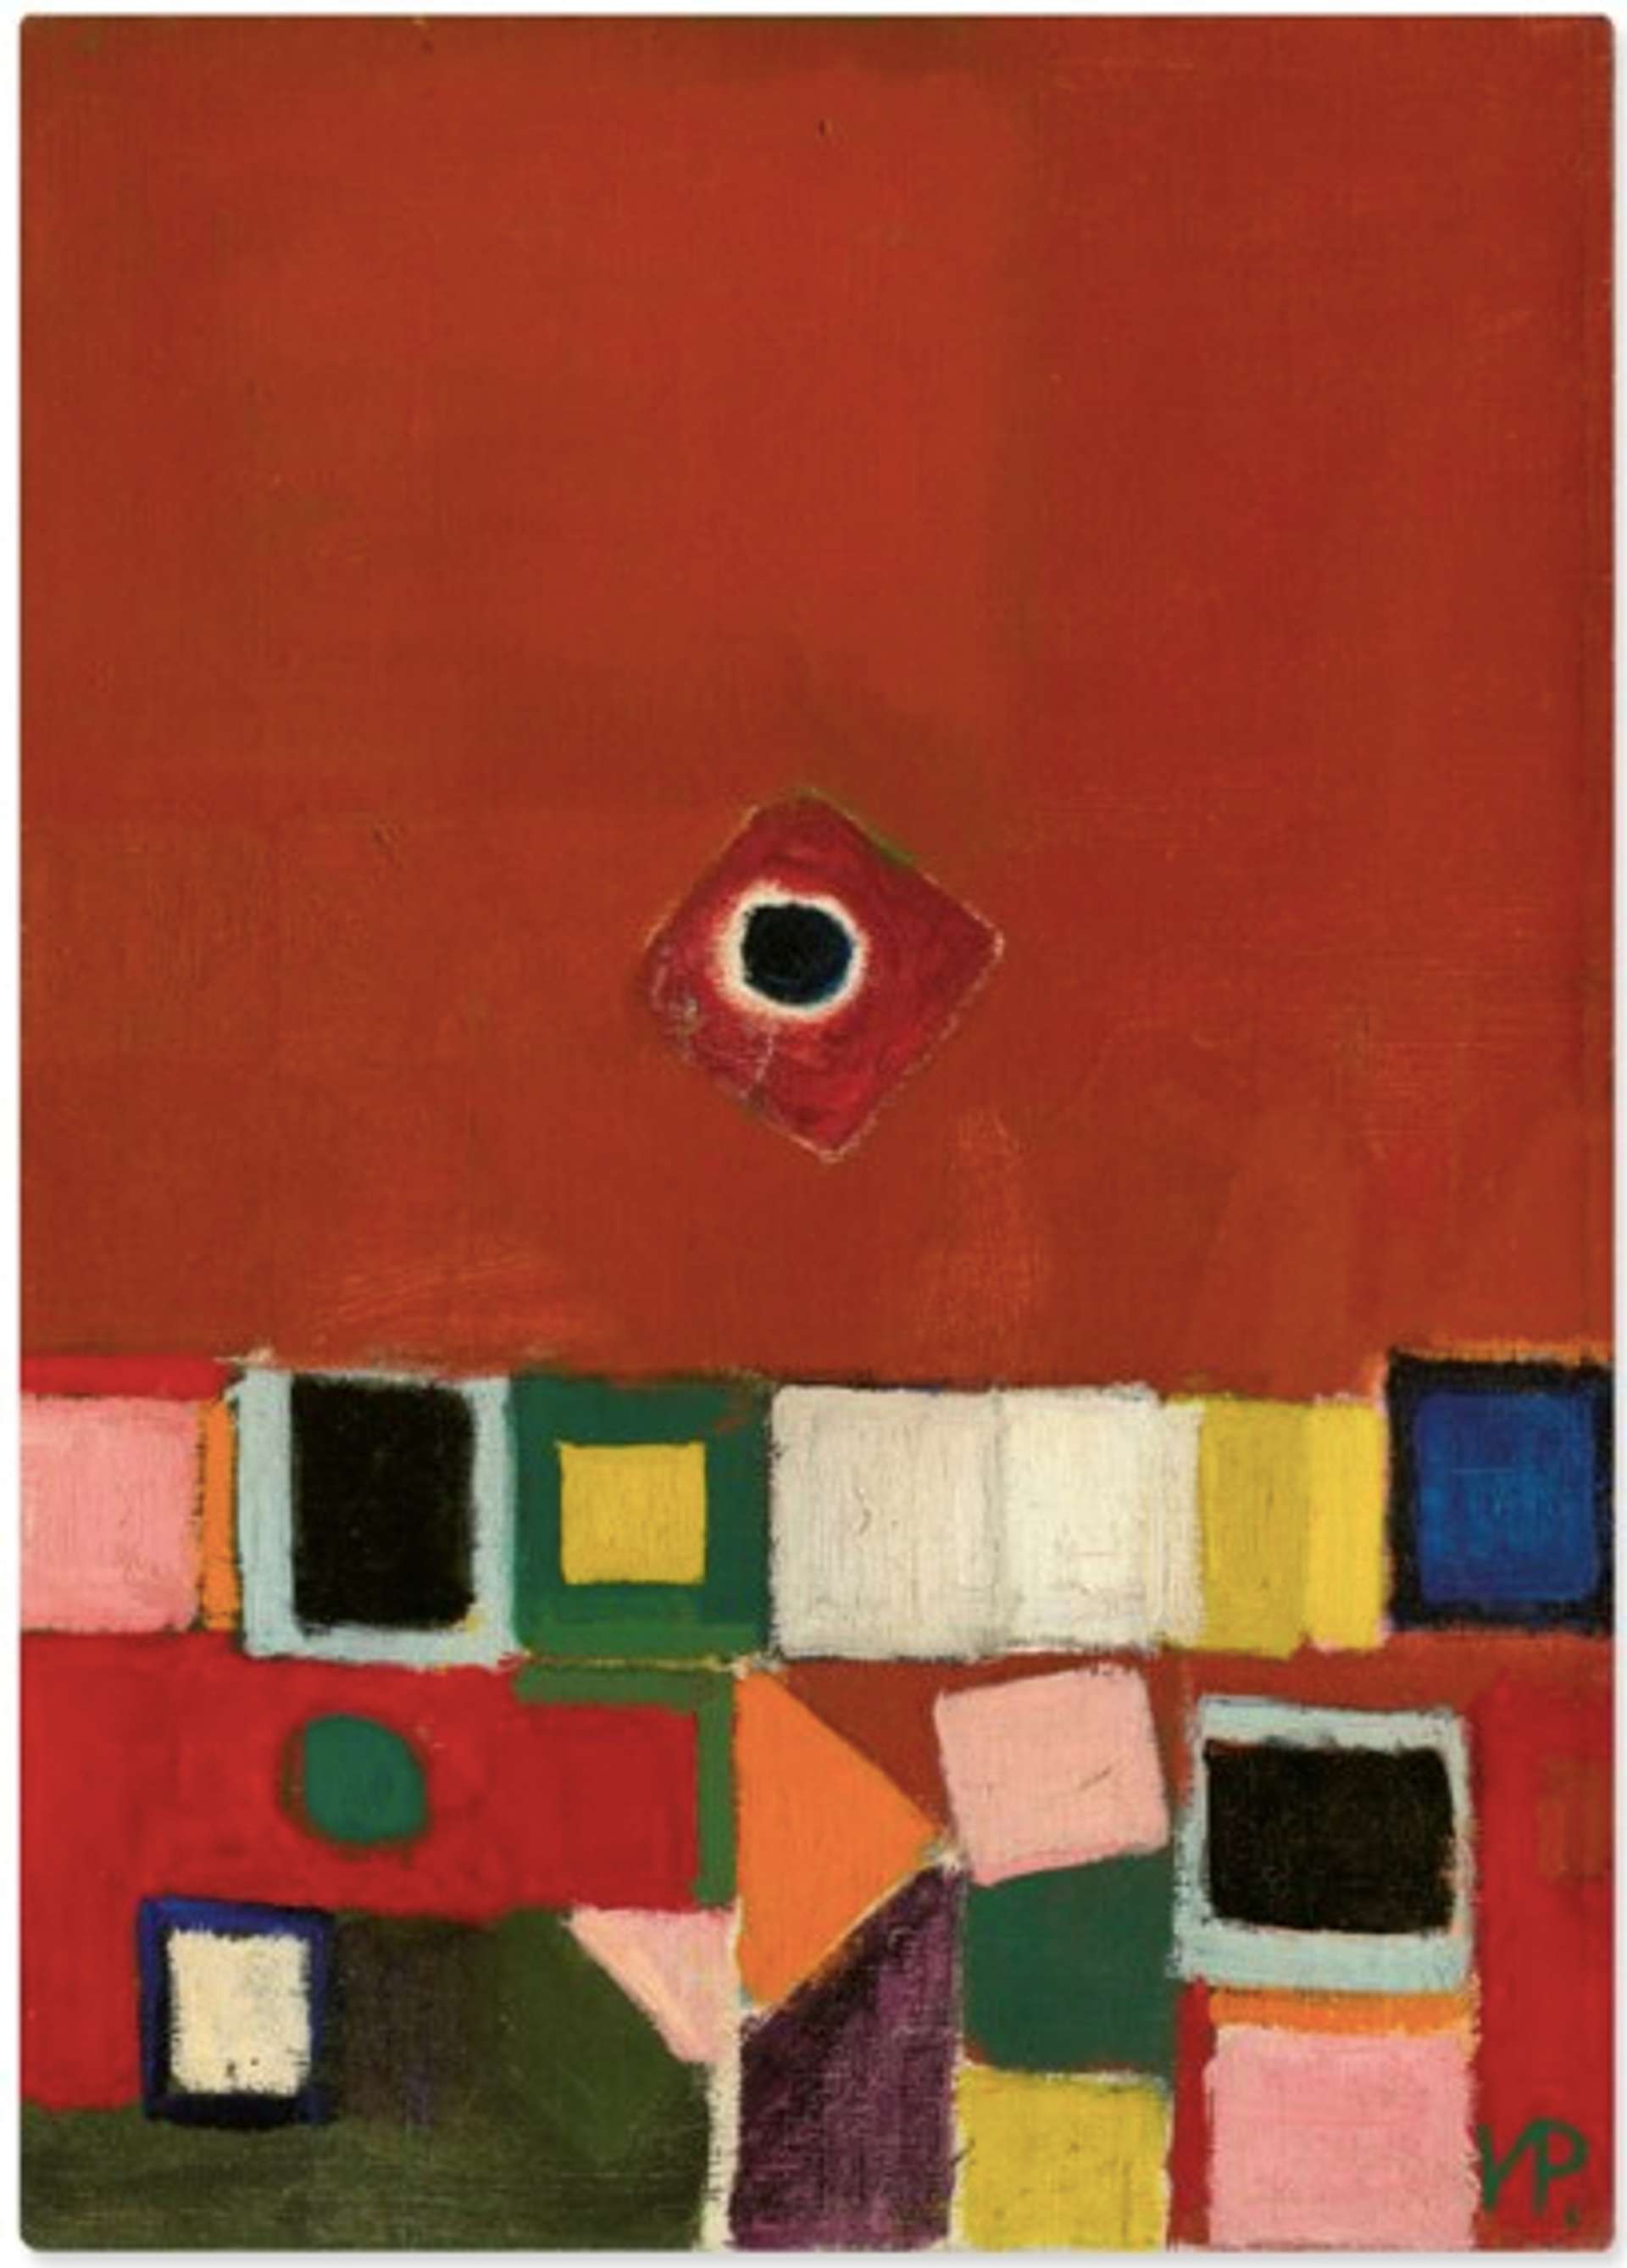  A red-washed abstract painting with geometric shapes in different colours at the bottom, while a small black circle outlined in white sits at the centre of the upper red section.